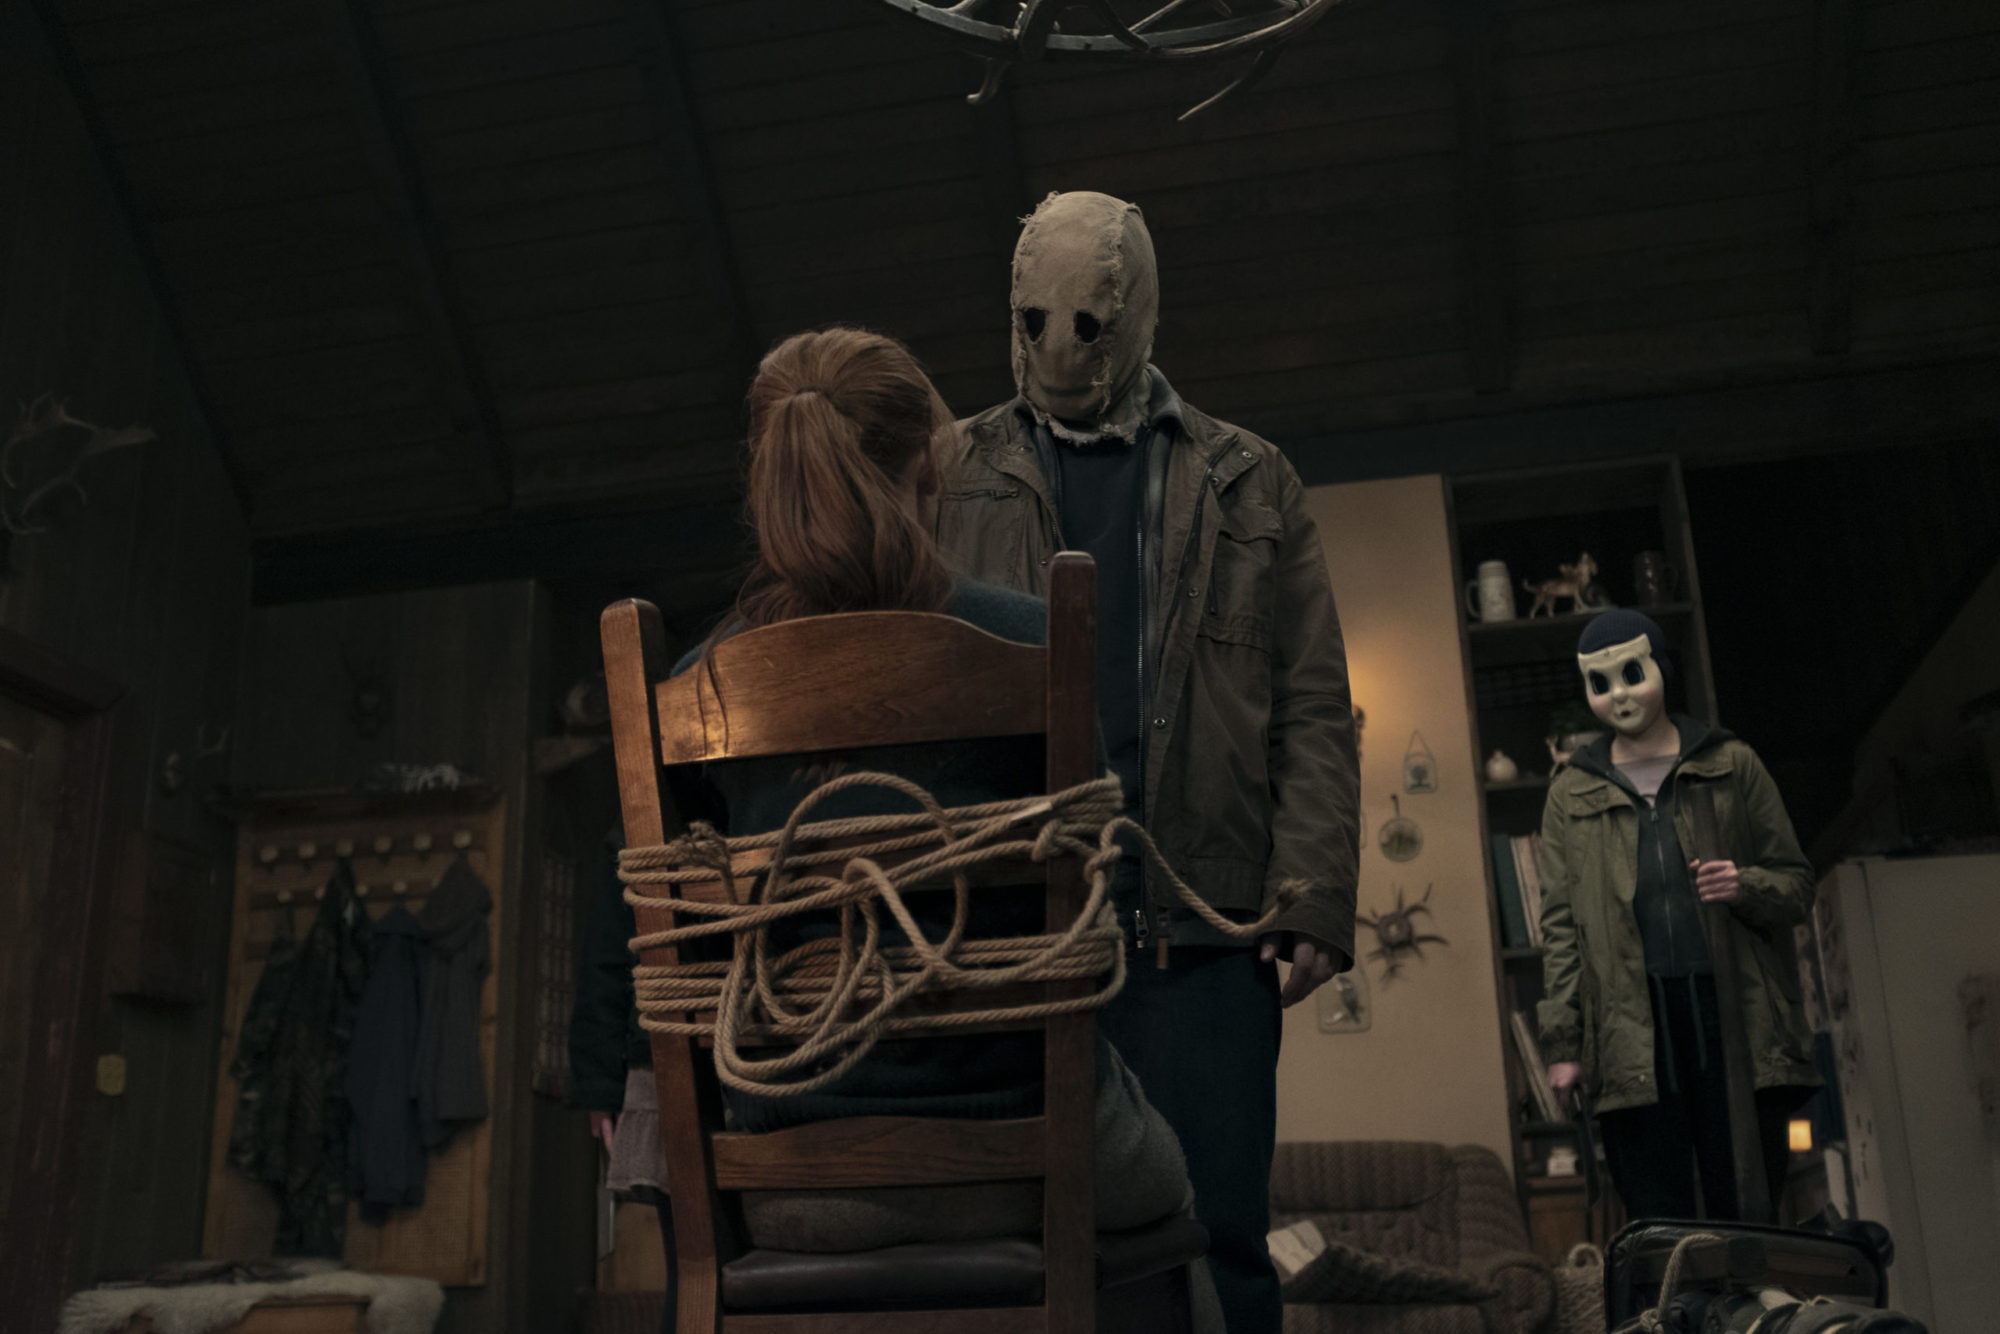 The Strangers Chapter 1 review